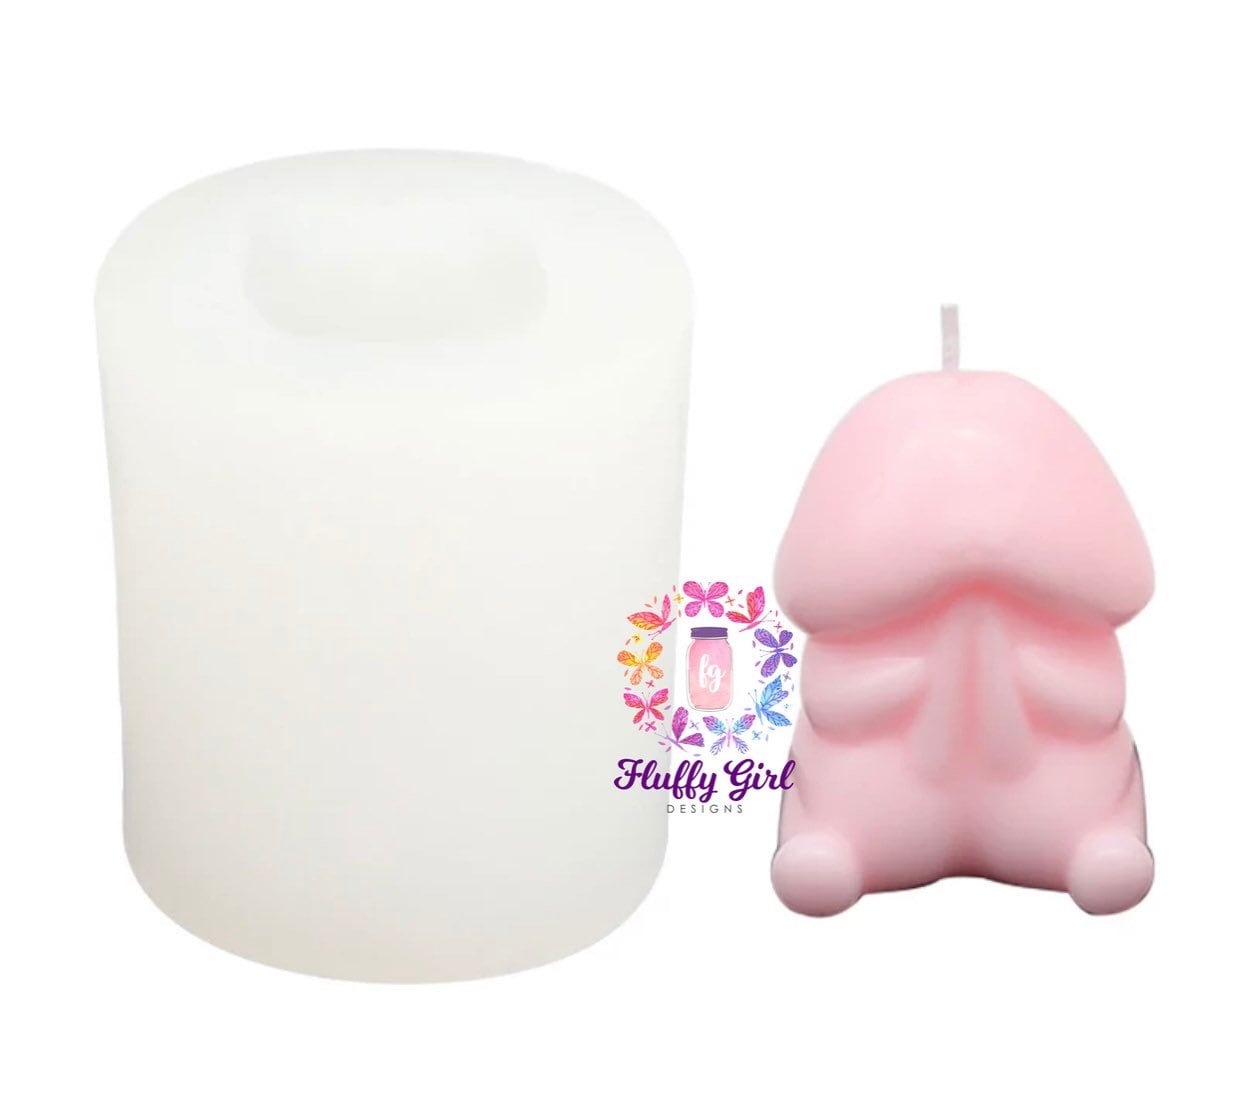 Penis Mold, Genital Mold, Dick Candle Mold, Sexy Penis Mold, Adult